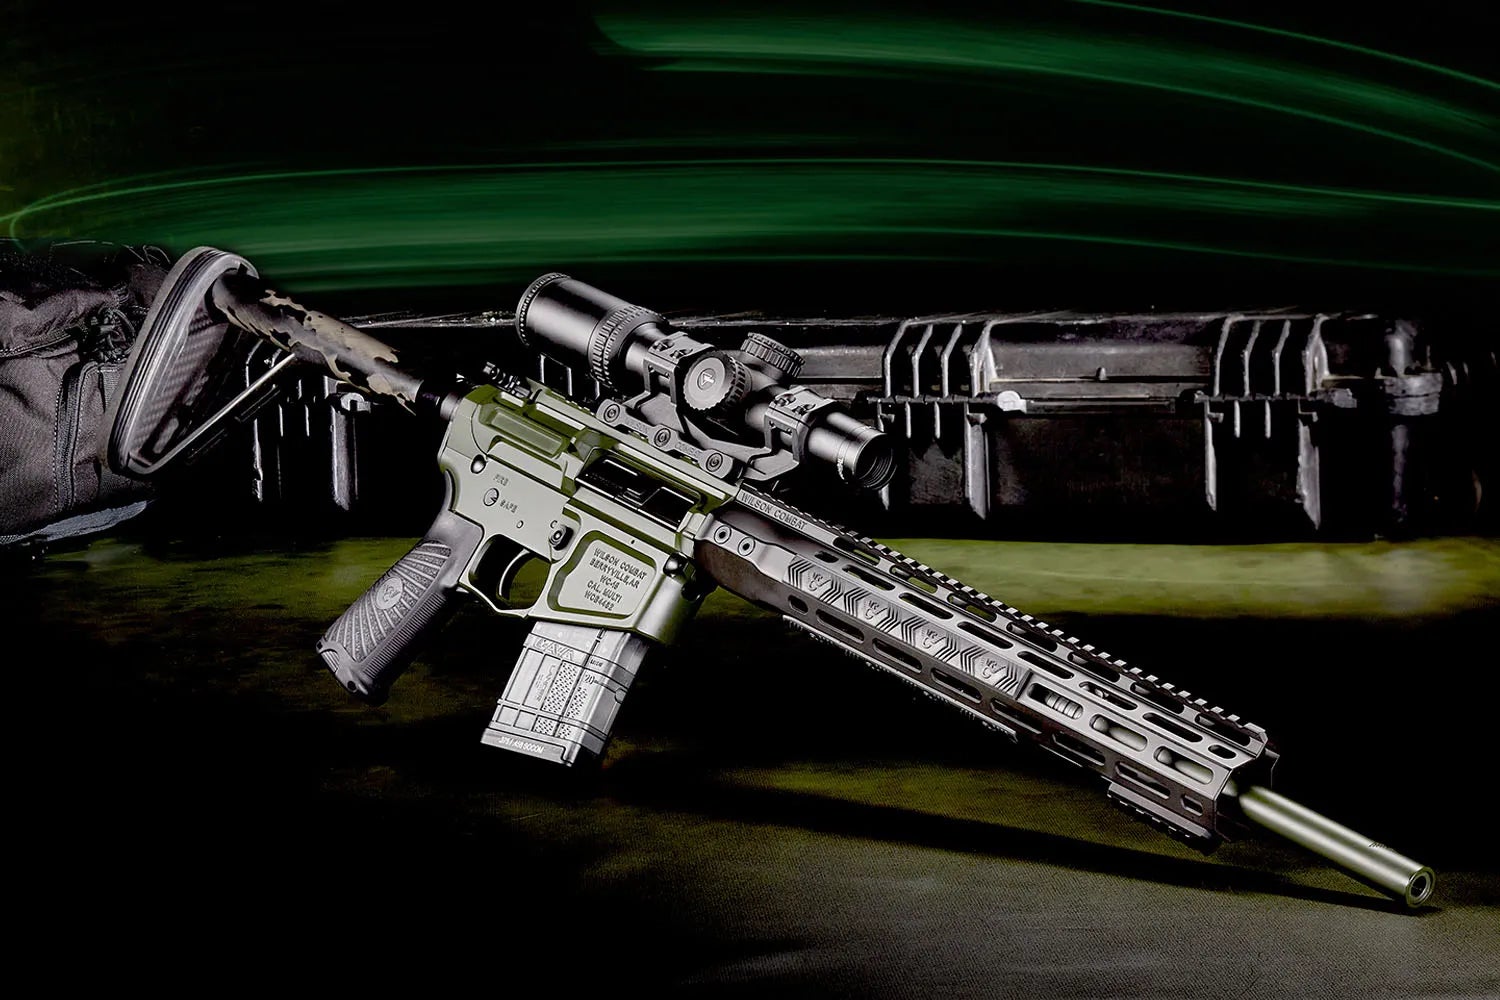 A hunting AR-15 made by Wilson Combat